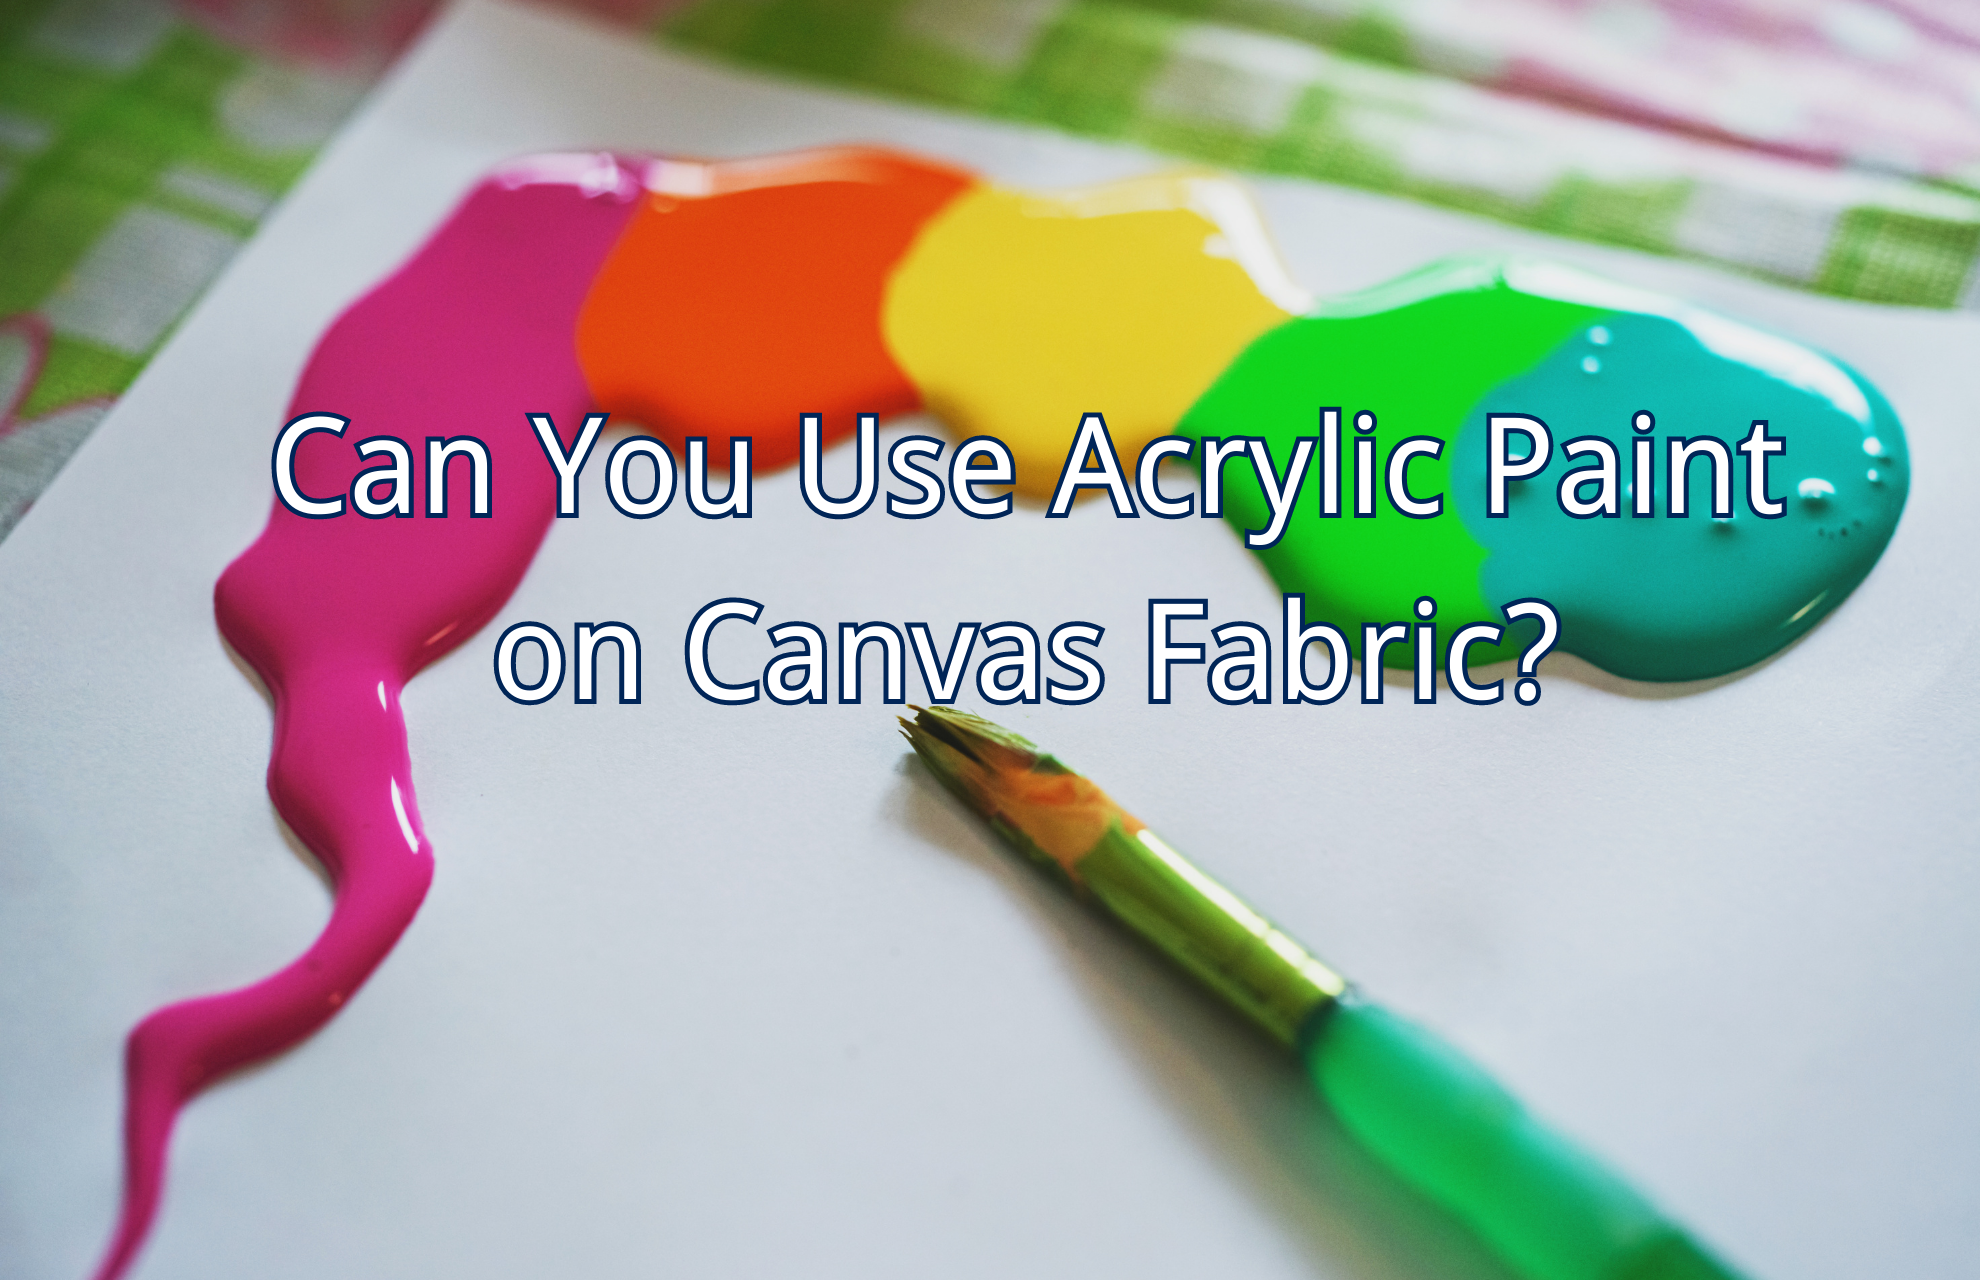 Can You Use Acrylic Paint on Canvas Fabric? How?